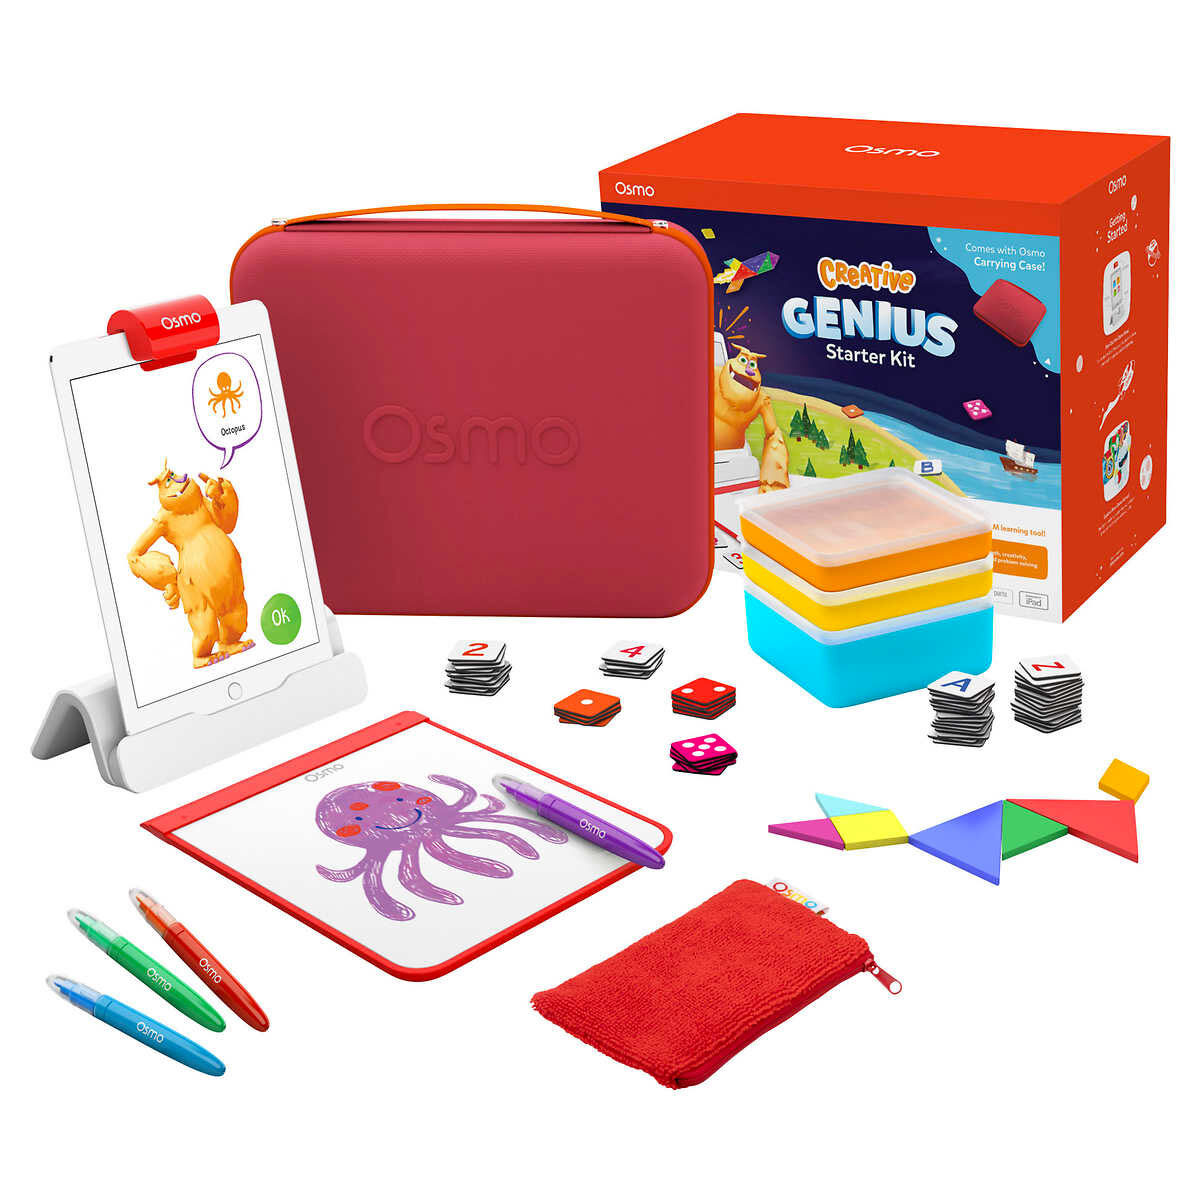 Osmo Creative Genius Starter Kit And Carrying Case Bundle (4+ Years)